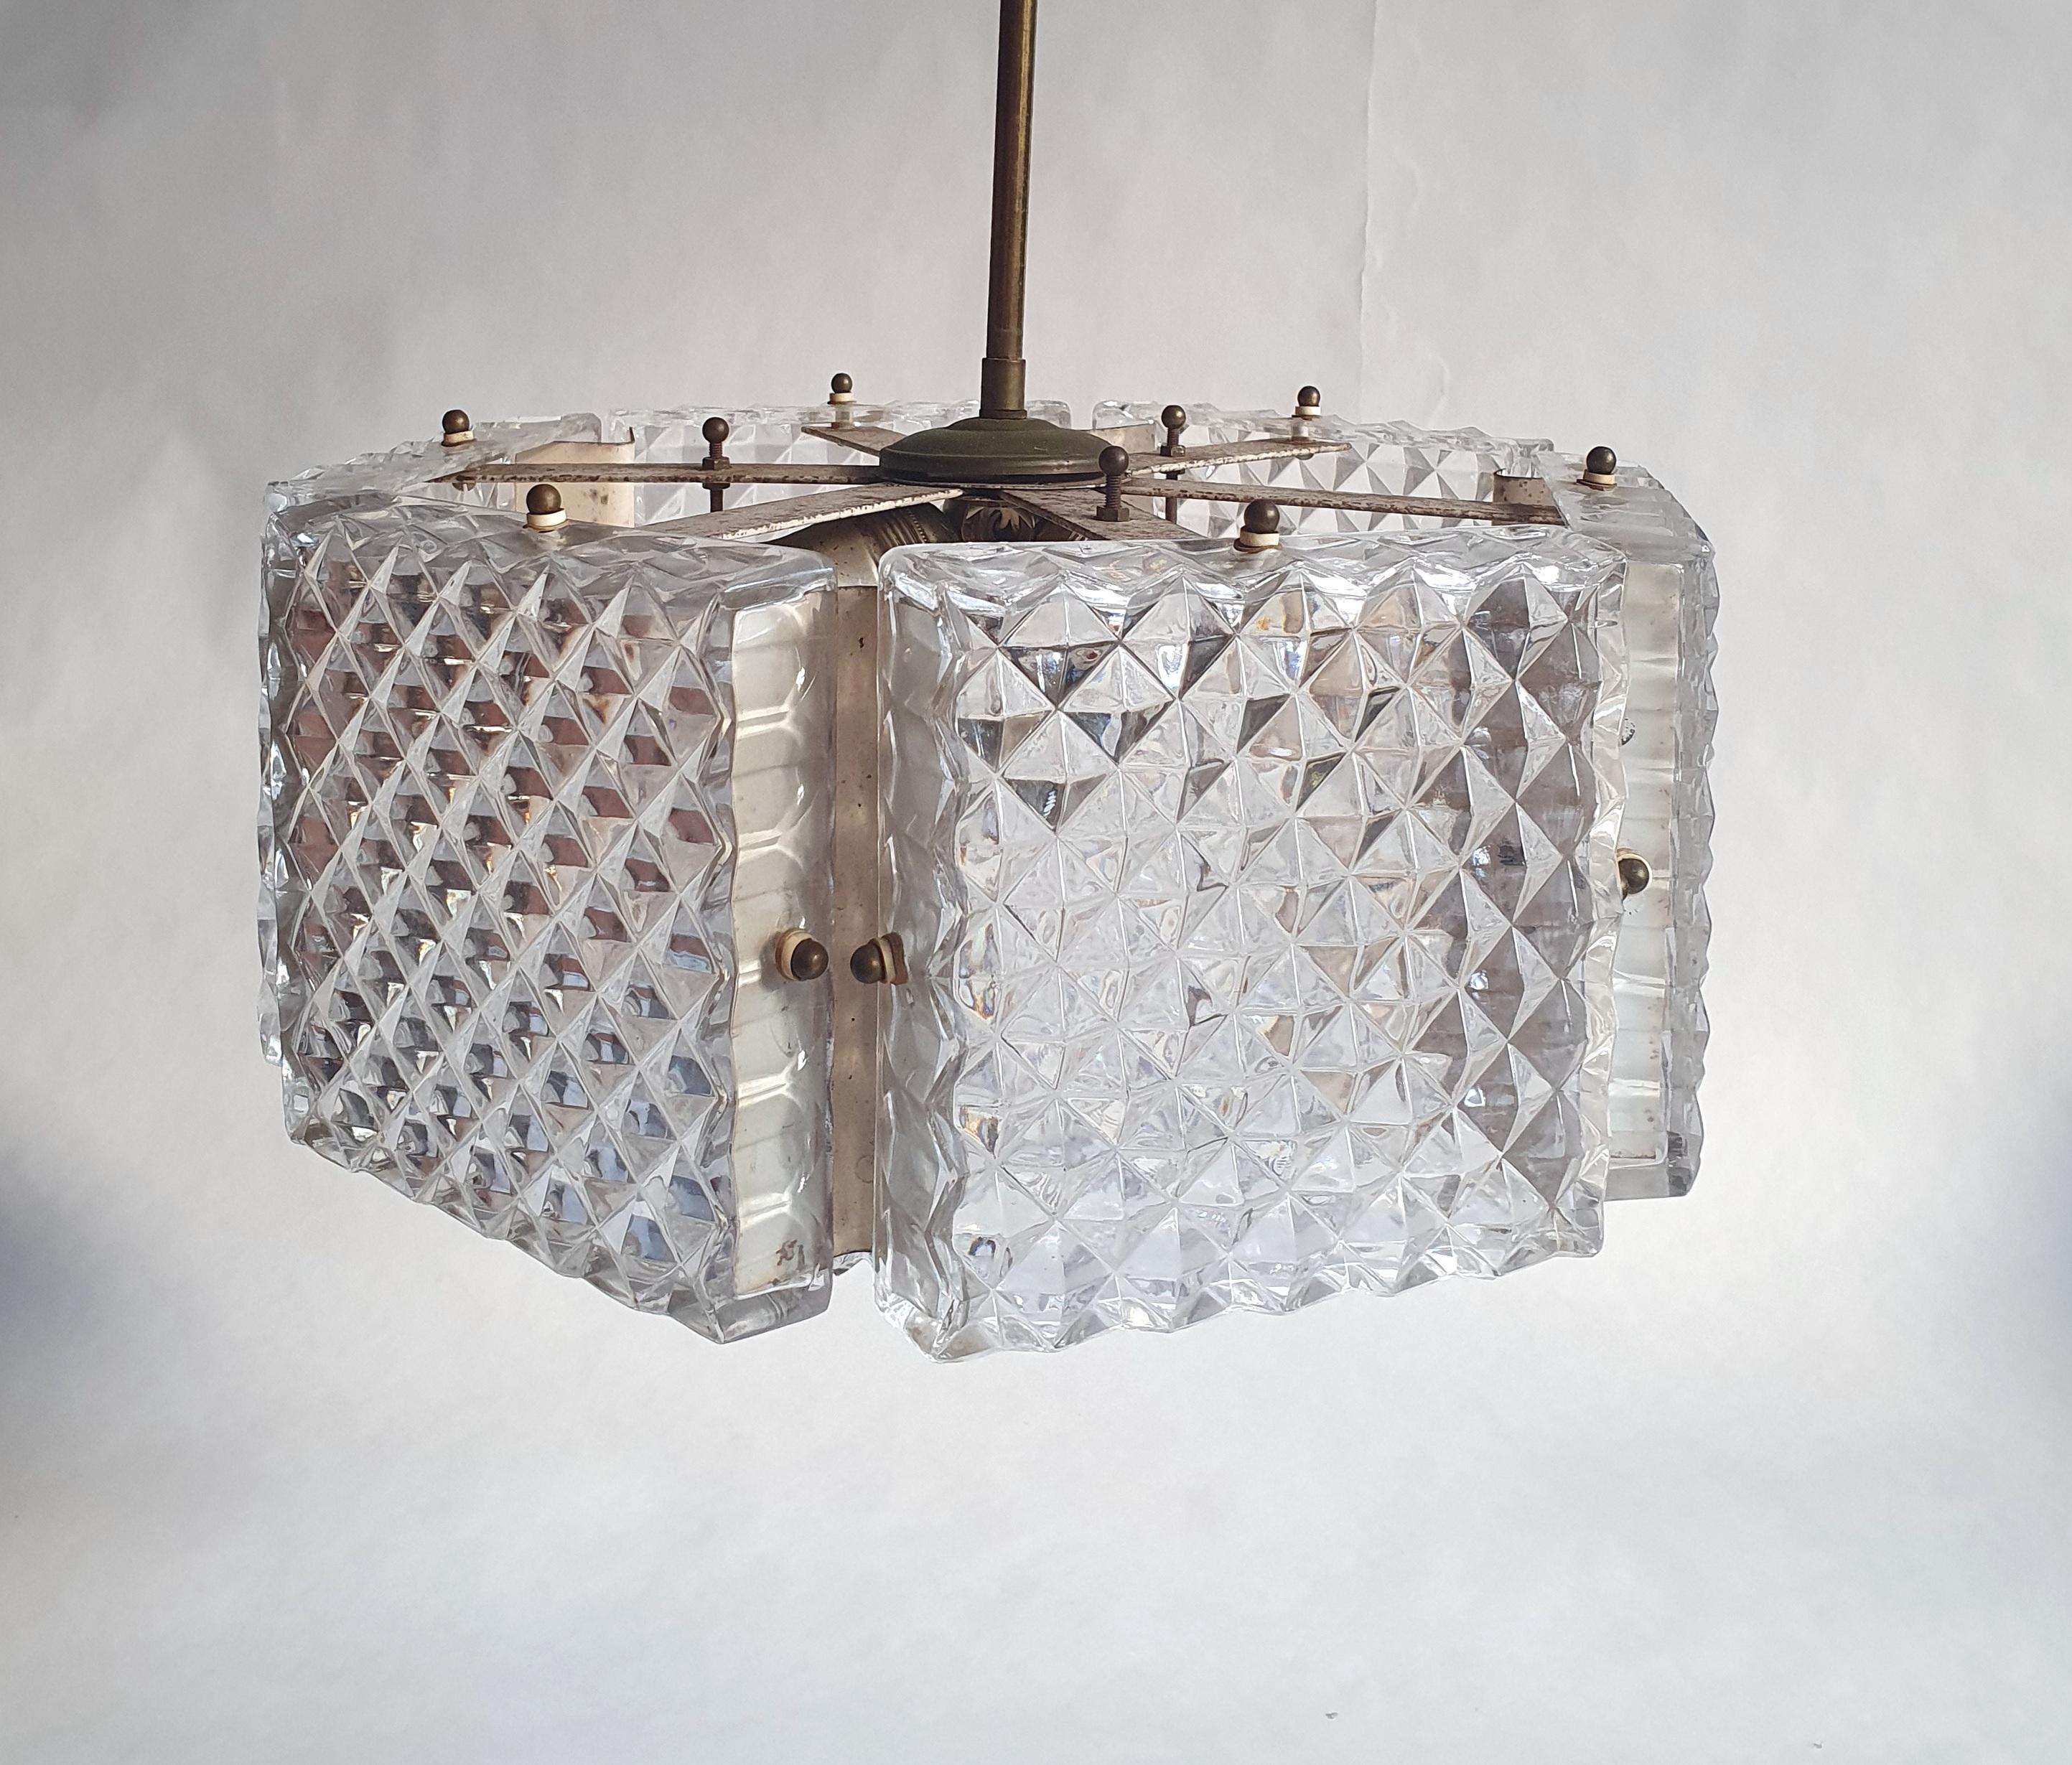 Midcentury Swedish Chandelier by Orrefors Sweden In Good Condition For Sale In Albano Laziale, Rome/Lazio